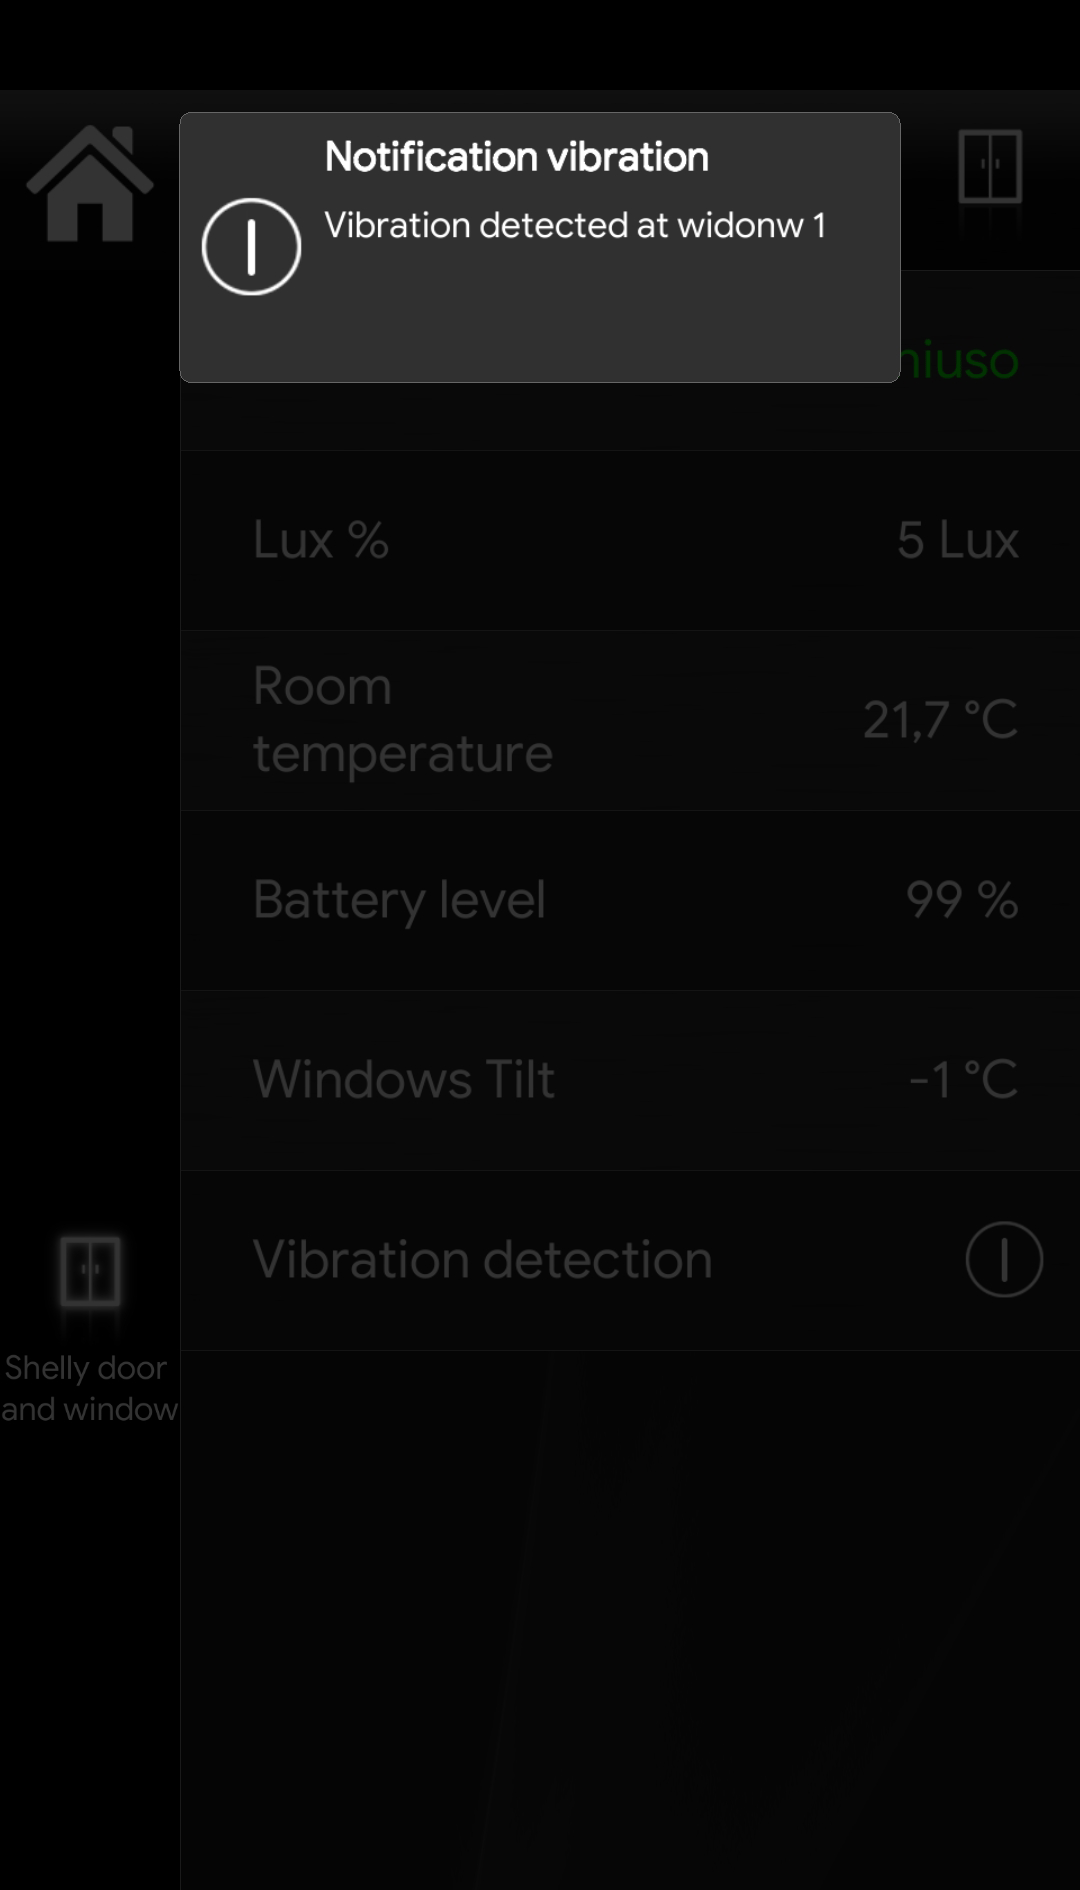 Here displayed how the project configuration is inside the Home automation app EVE Remote Plus when the shelly device has detected a vibration